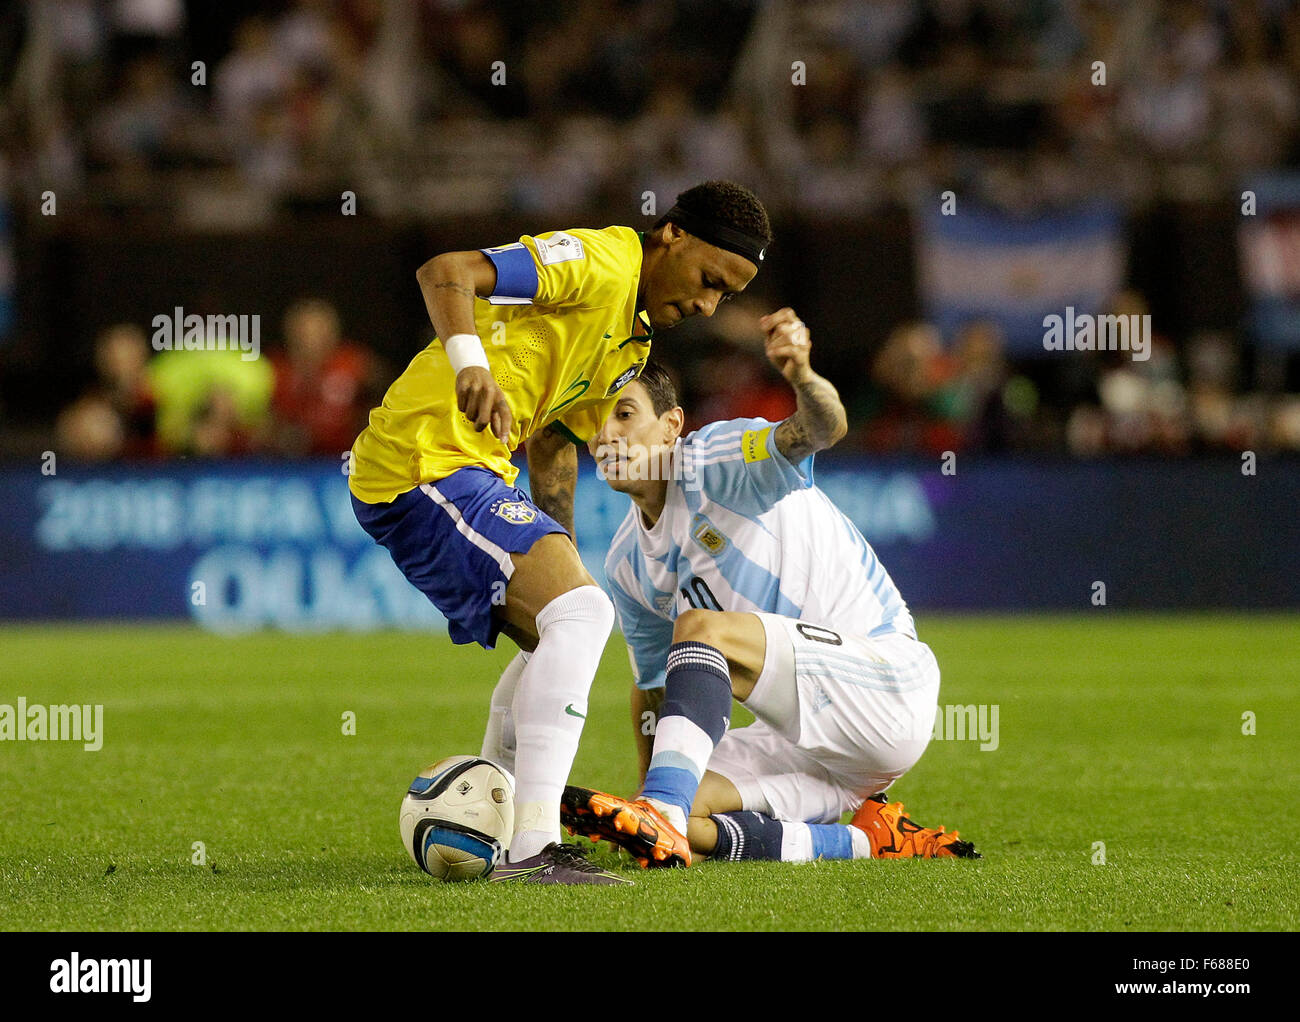 Buenos Aires, Argentina. 13th Nov, 2015. Argentina's Angel Di Maria (R) vies for the ball with Brazil's Neymar during the 2018 Russia World Cup qualifying match between Argentina and Brazil in the Monumental Antonio Vespuci Stadium in Buenos Aires, capital of Argentina, on Nov. 13, 2015. The match ended in a draw 1-1. Credit:  Alberto Raggio/Xinhua/Alamy Live News Stock Photo